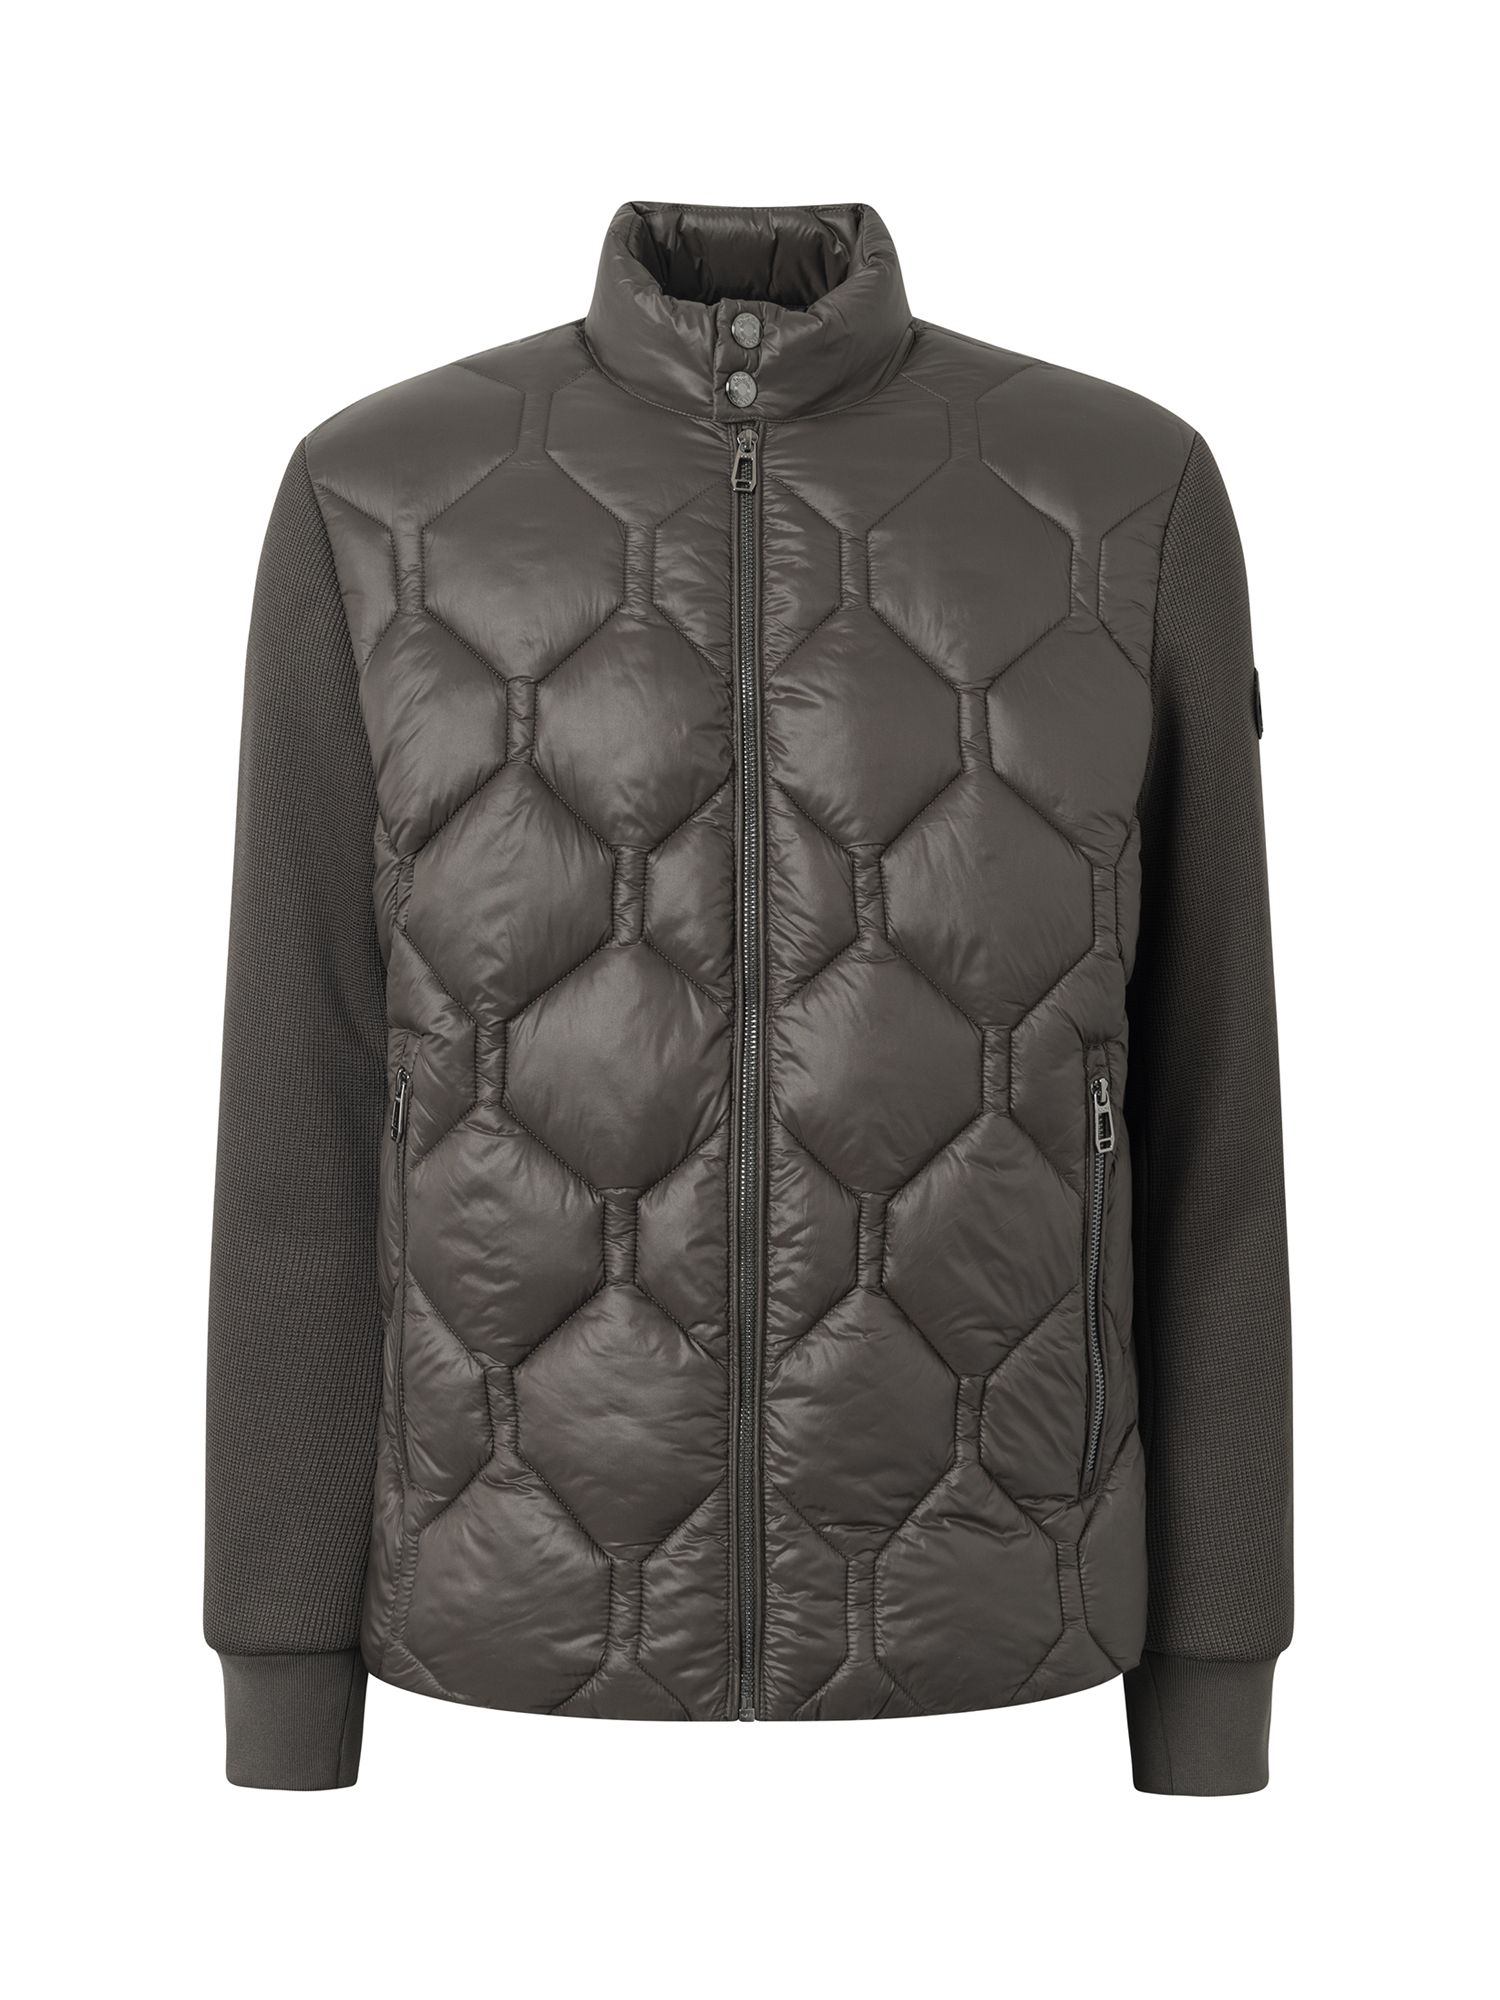 JOOP! Ciscos Quilted Jacket, Bright Green at John Lewis & Partners